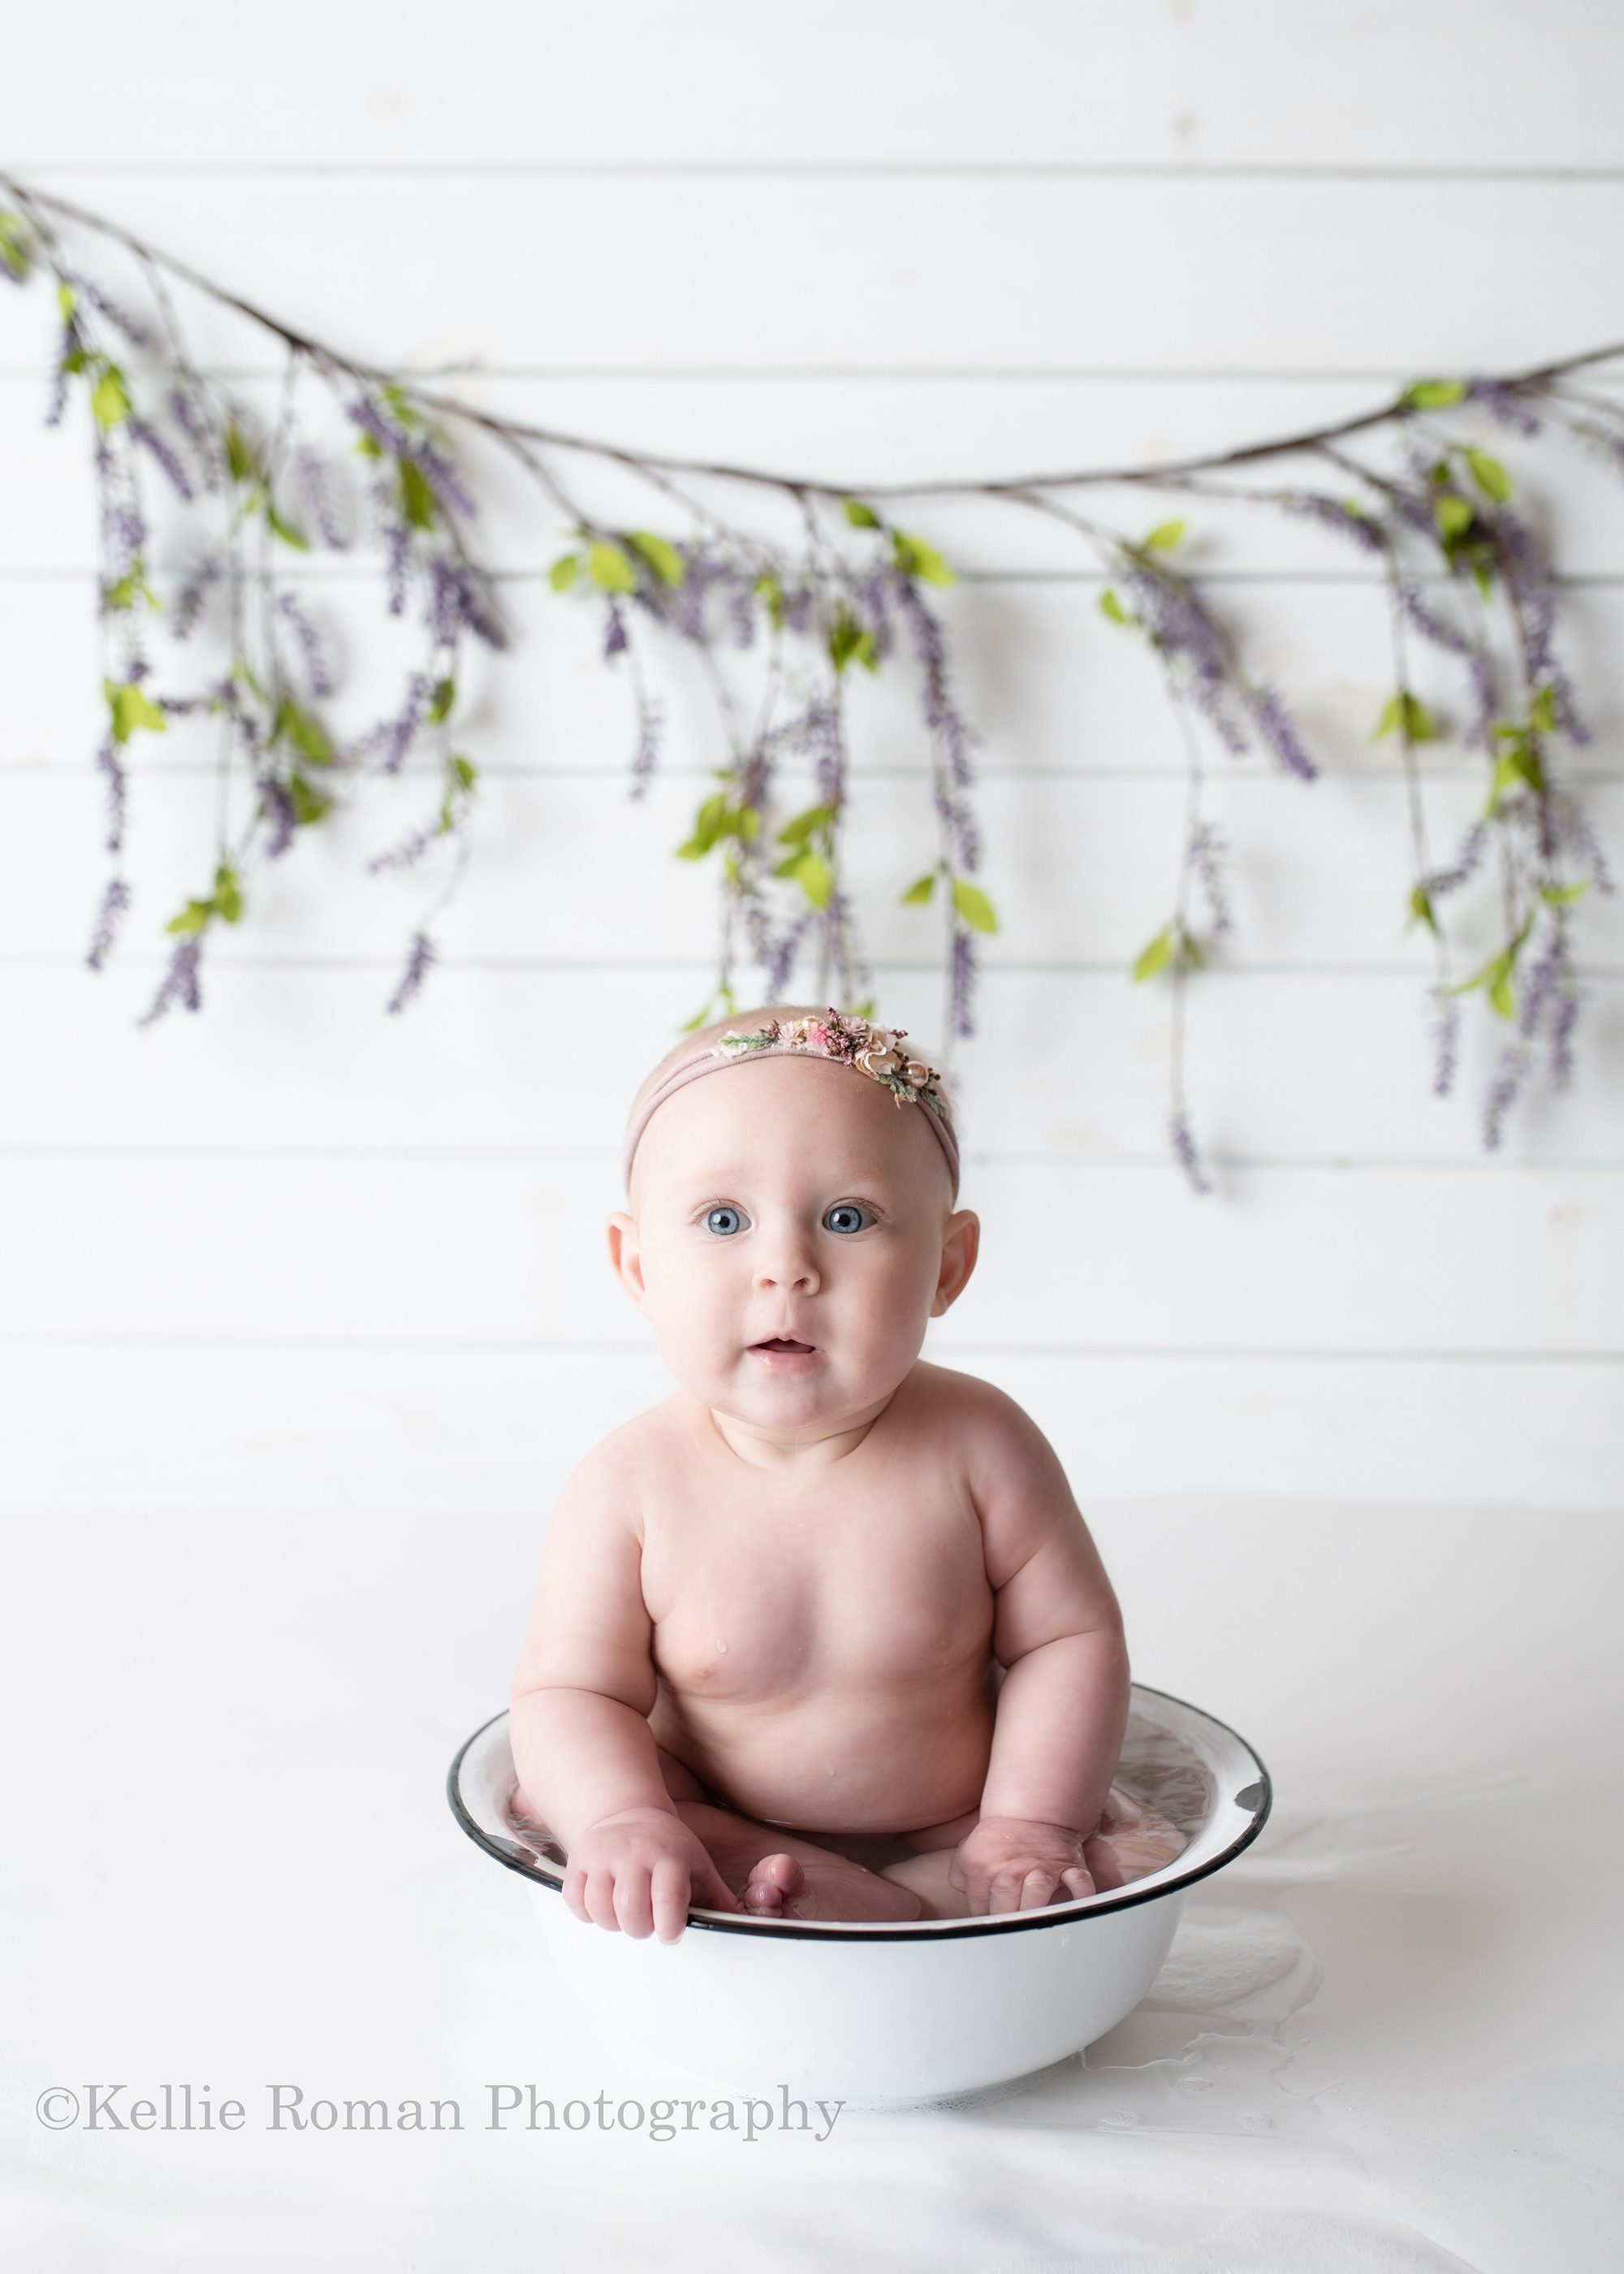 happiest six month old. A baby girl is sitting in a white vintage bowl with water and soap. There is water all over the white floor and she is in front of a white wood wall with lilac vine behind her. She has on a light purple floral headband and is looking into the camera with big blue eyes.